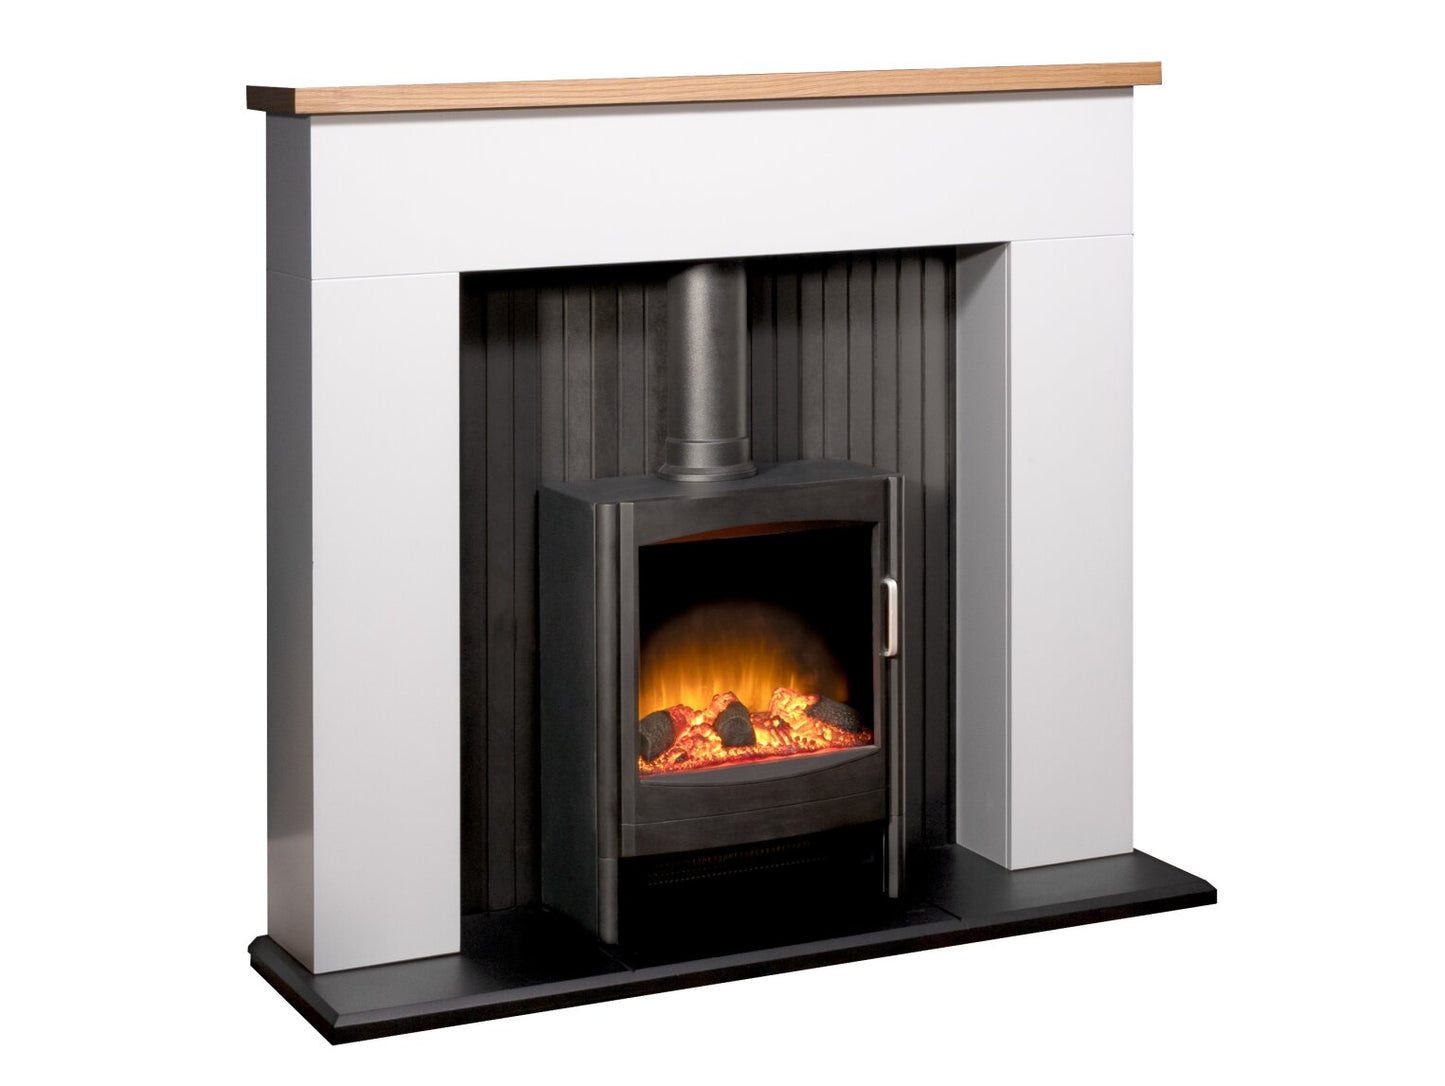 Adam Innsbruck Stove Fireplace with Keston Electric Stove, 45 Inch 25329 Pure White